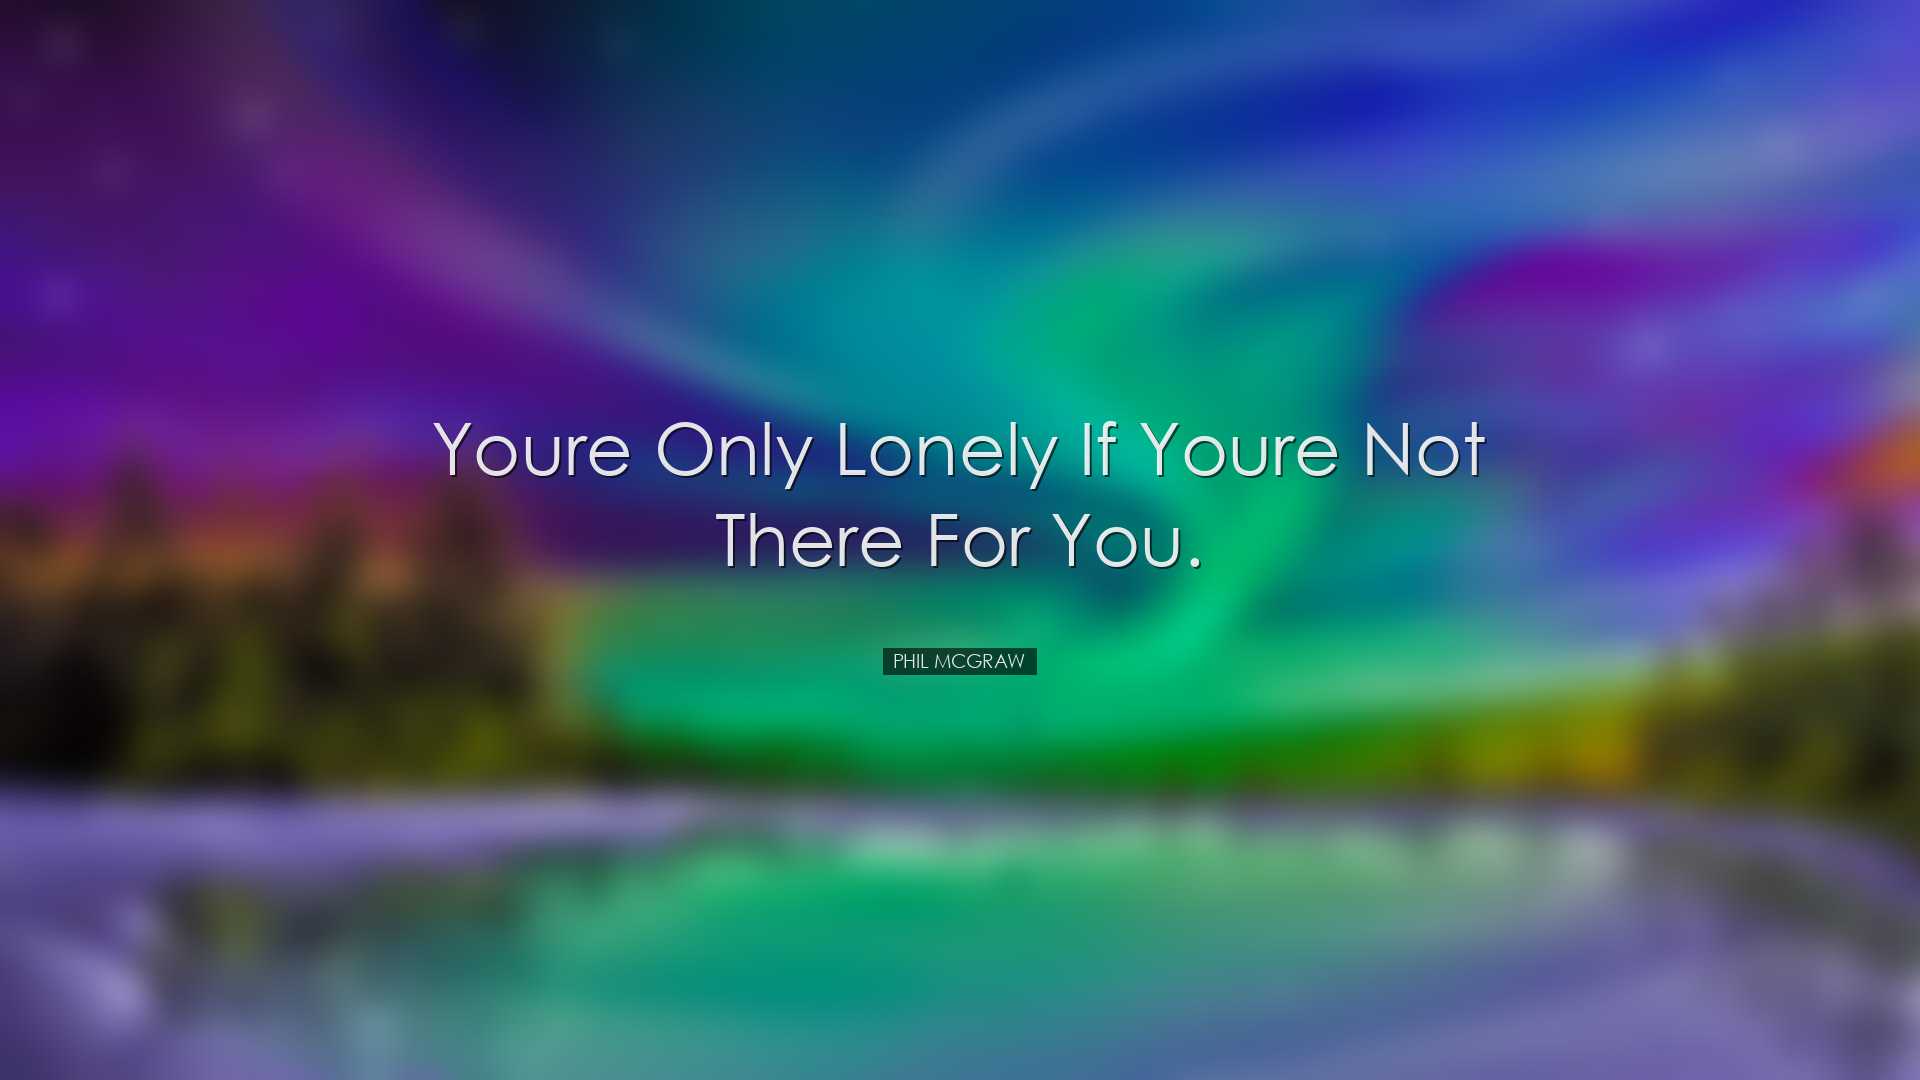 Youre only lonely if youre not there for you. - Phil McGraw